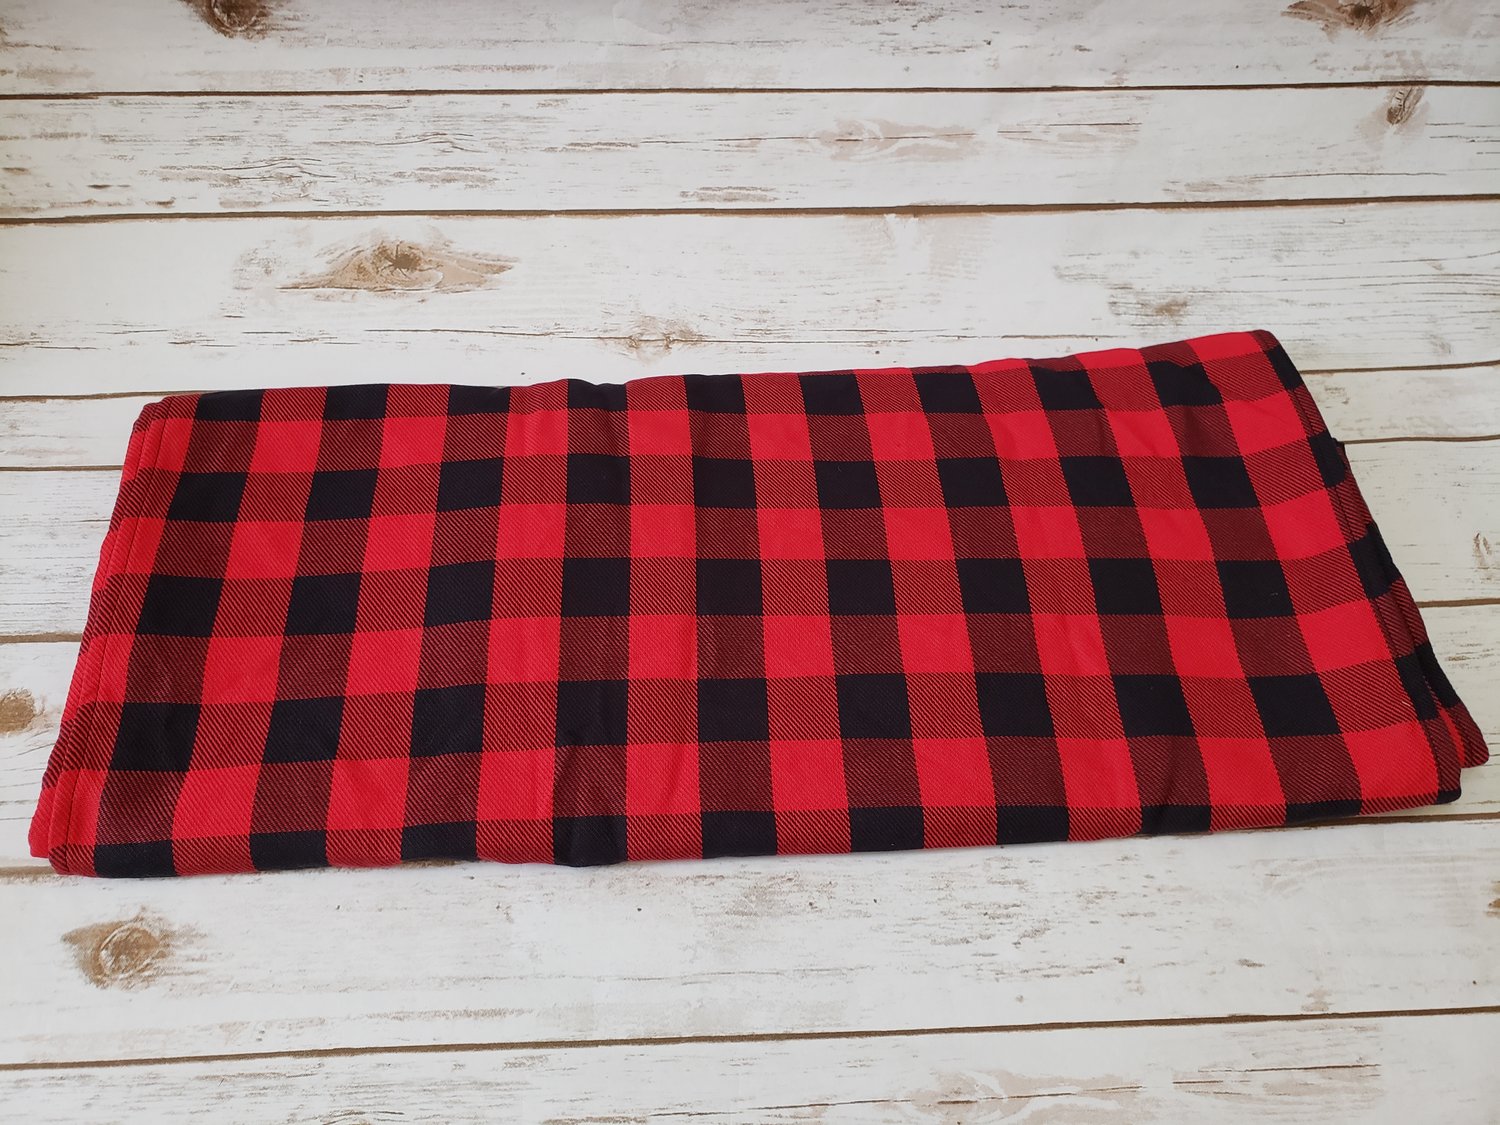 Tragetuch Butterfly Baby Company (Vaquero Wovens) checkered Buffalo Plaid Budget   Image